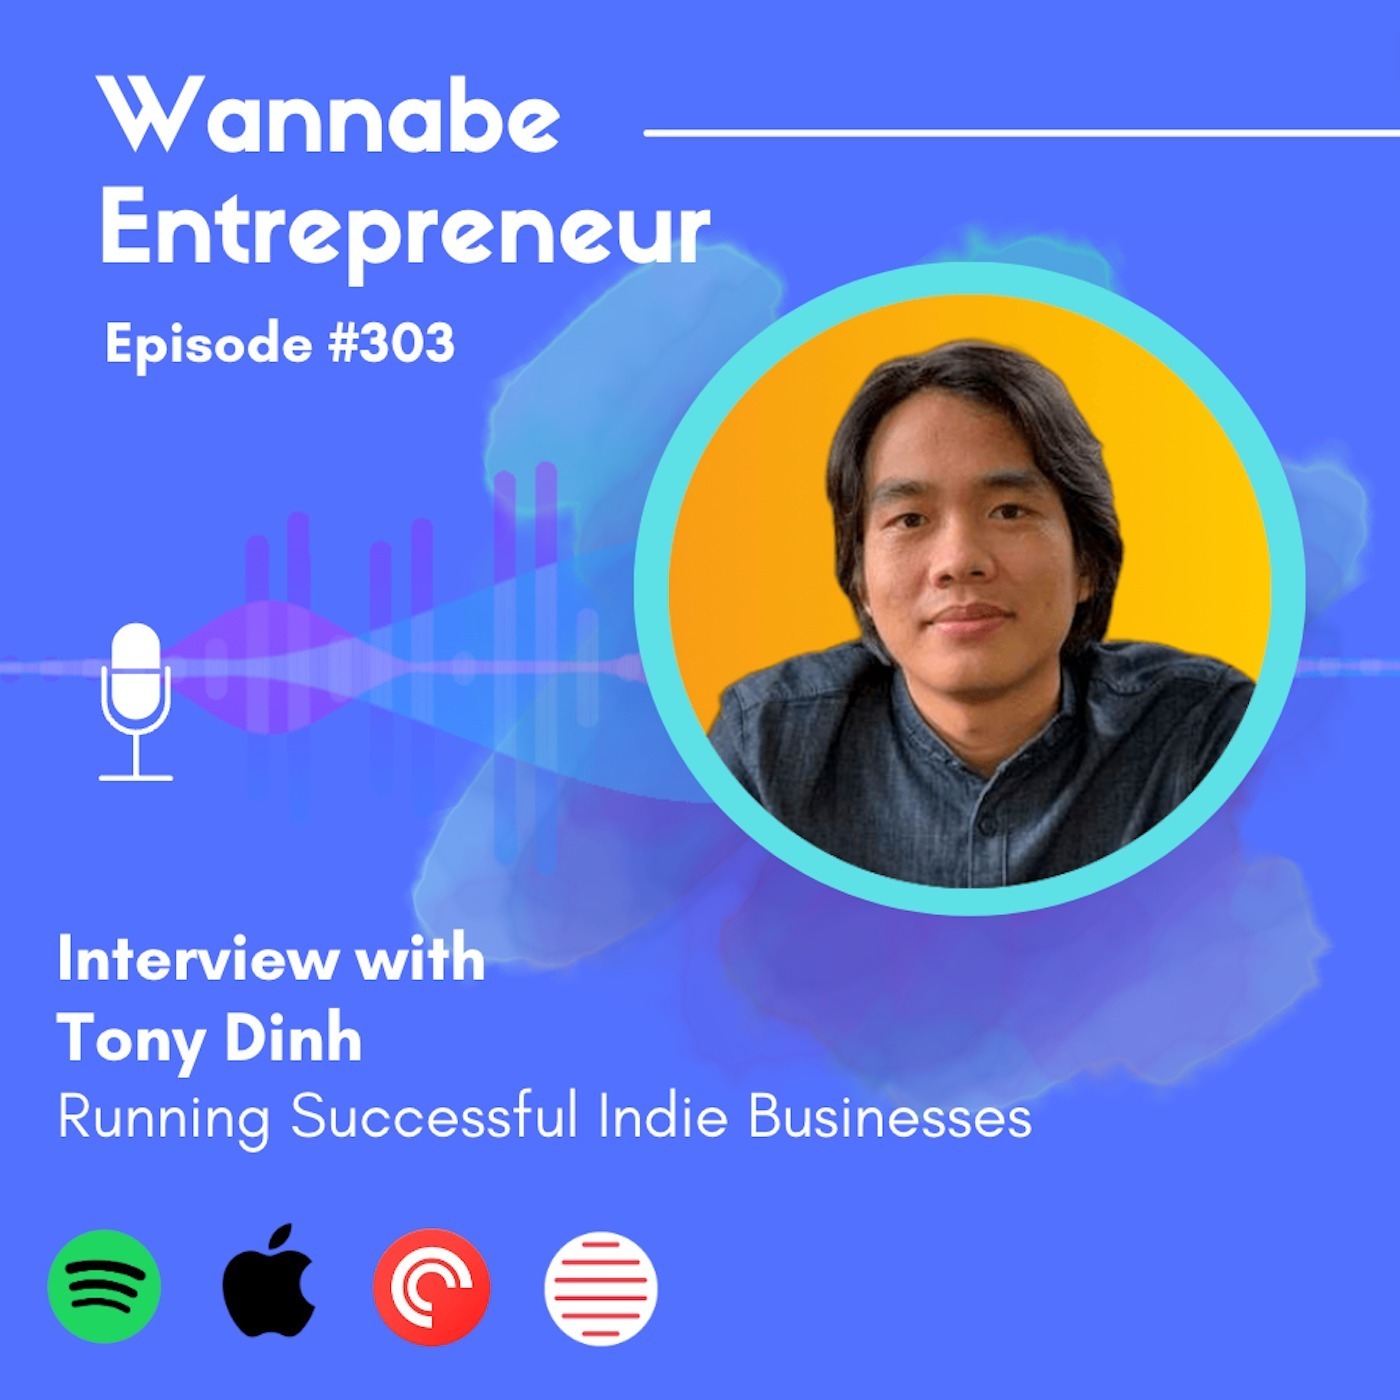 Interviewing Tony Dinh on how to run a successful indie businesses